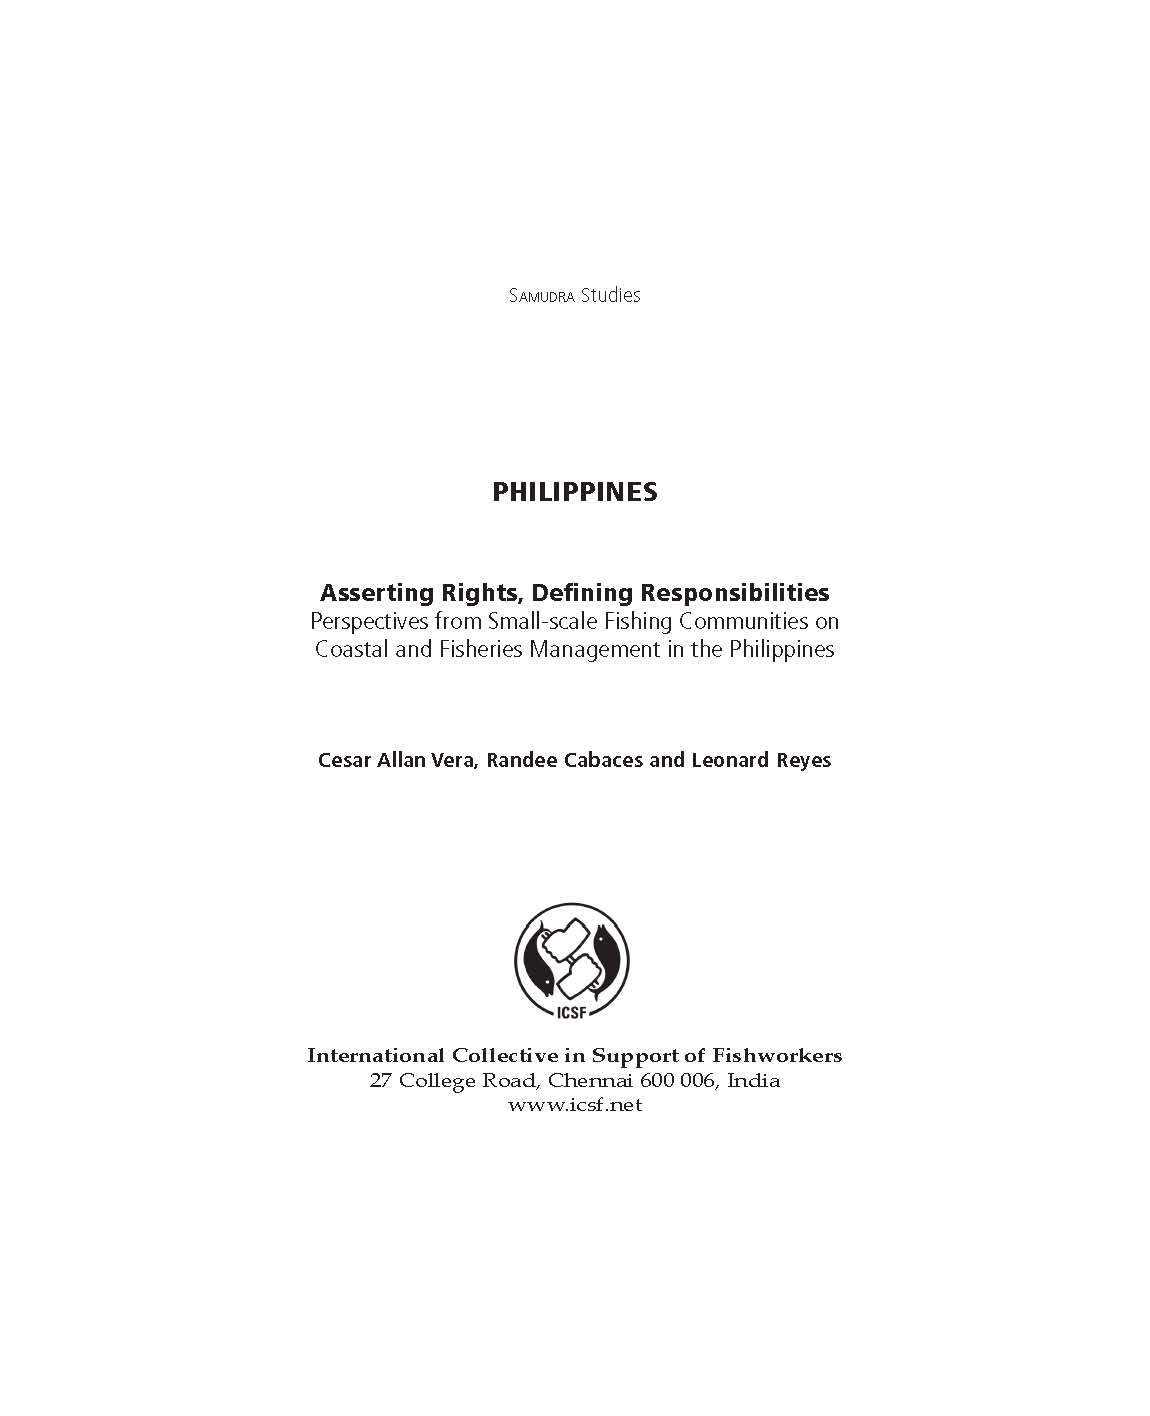 Asserting Rights, Defining Responsibilities: Perspectives from Small-scale Fishing Communities on Coastal and Fisheries Management in Philippines